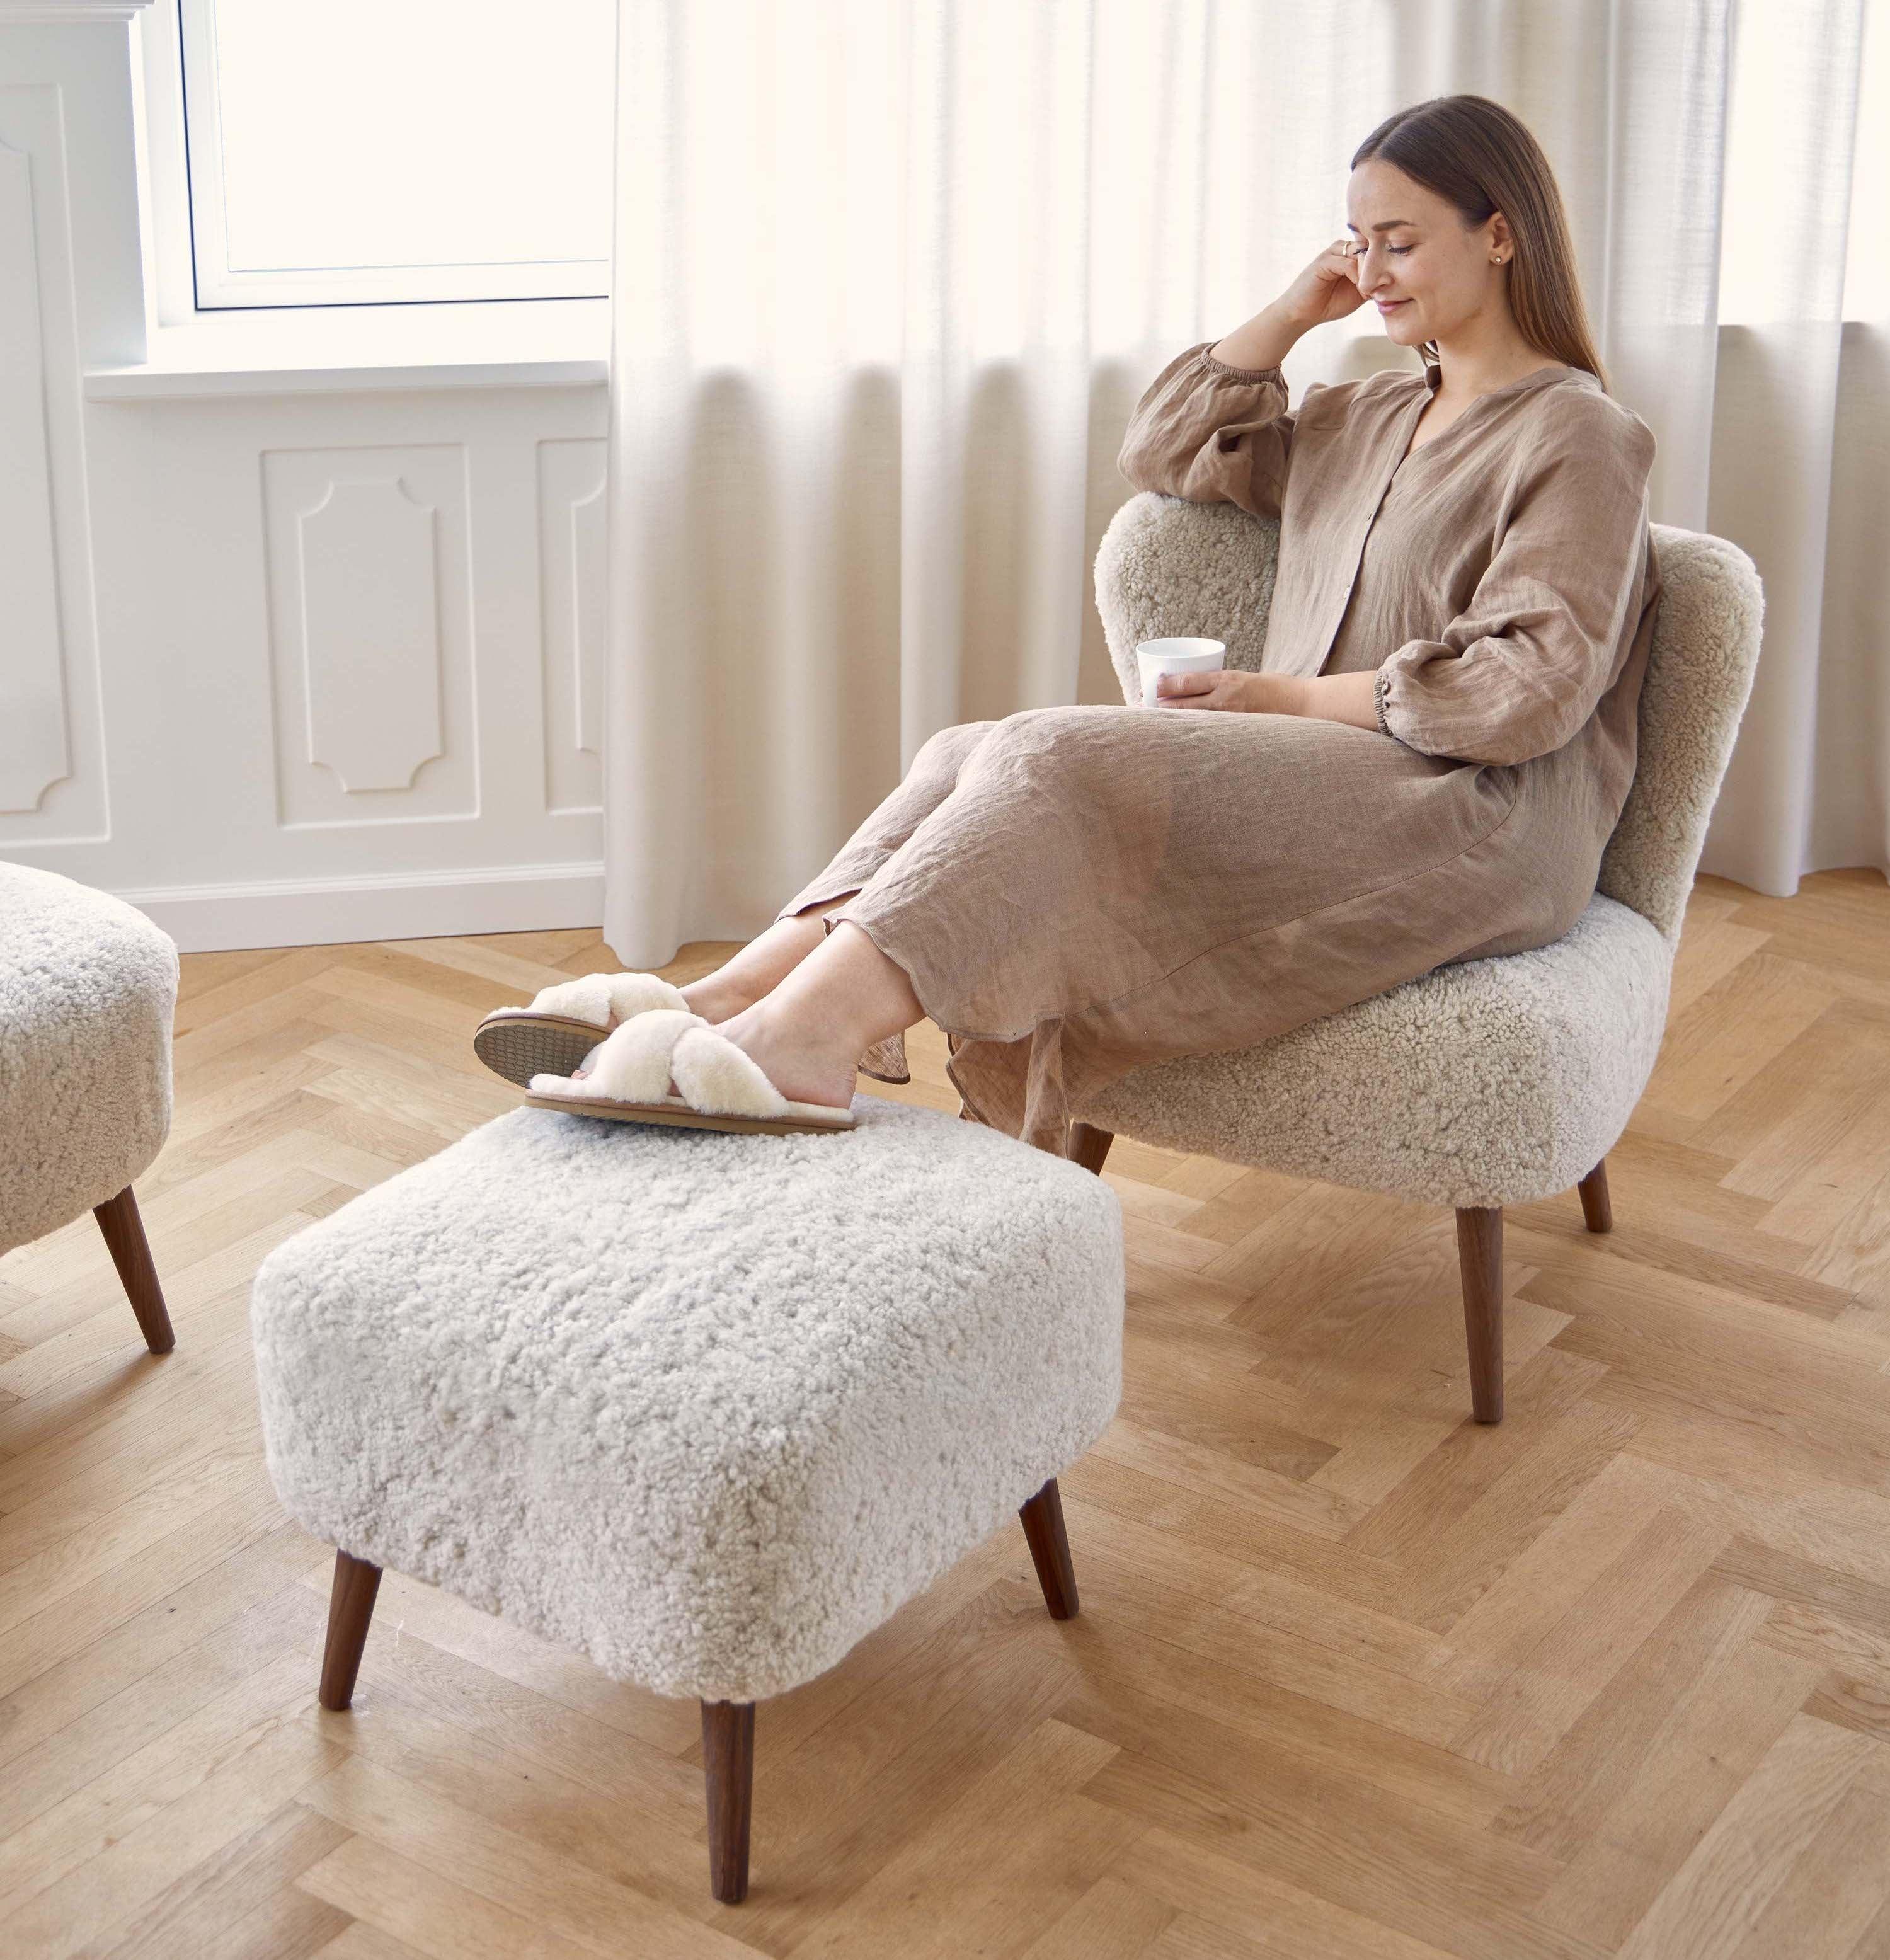 Why upholster furniture with sheepskin? - Naturescollection.eu